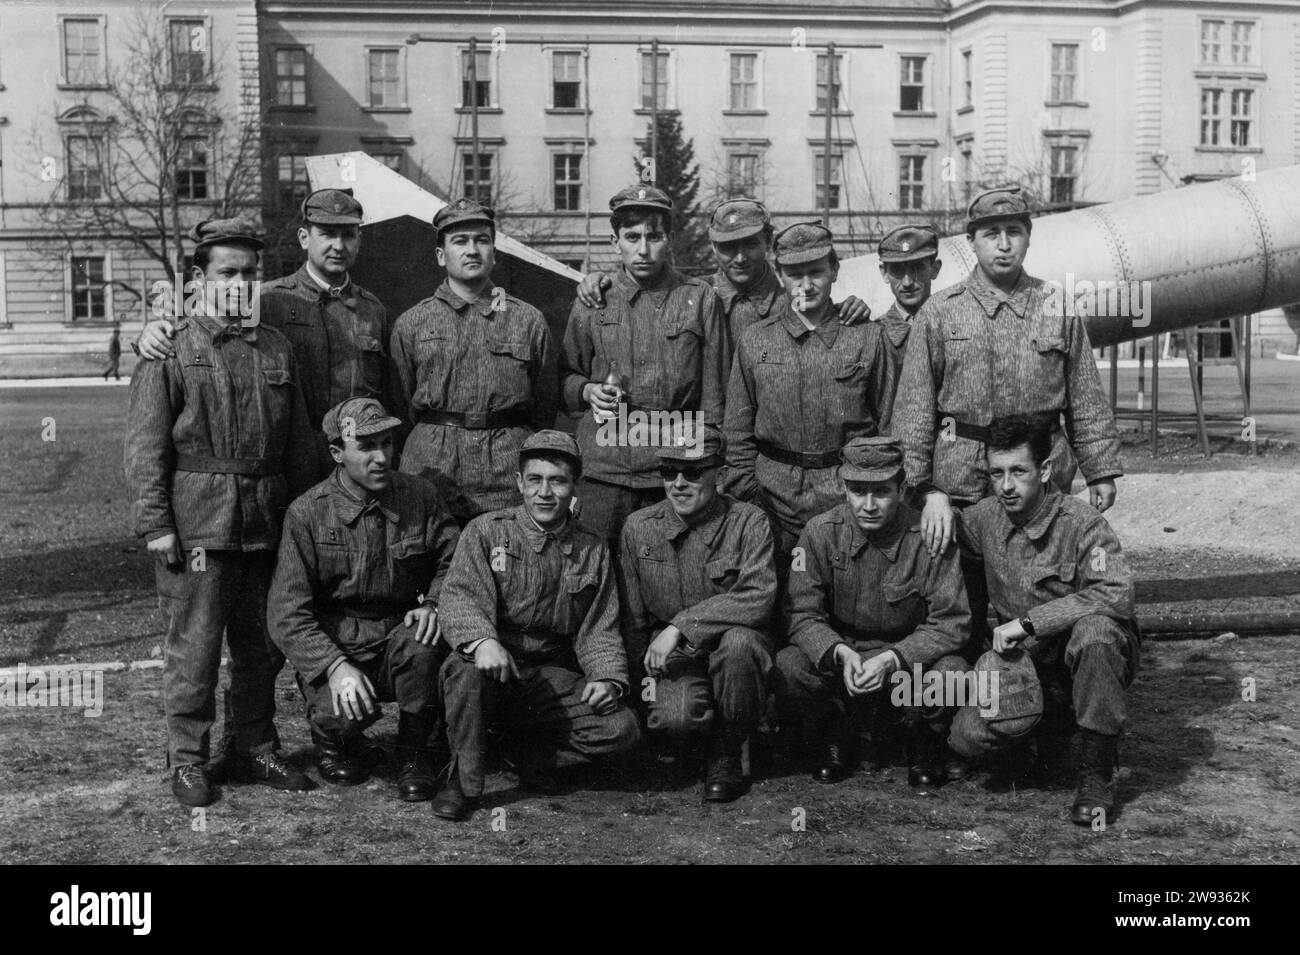 Young men from Czechoslovakia in compulsory military service. Czechoslovakia, 1950s. Stock Photo